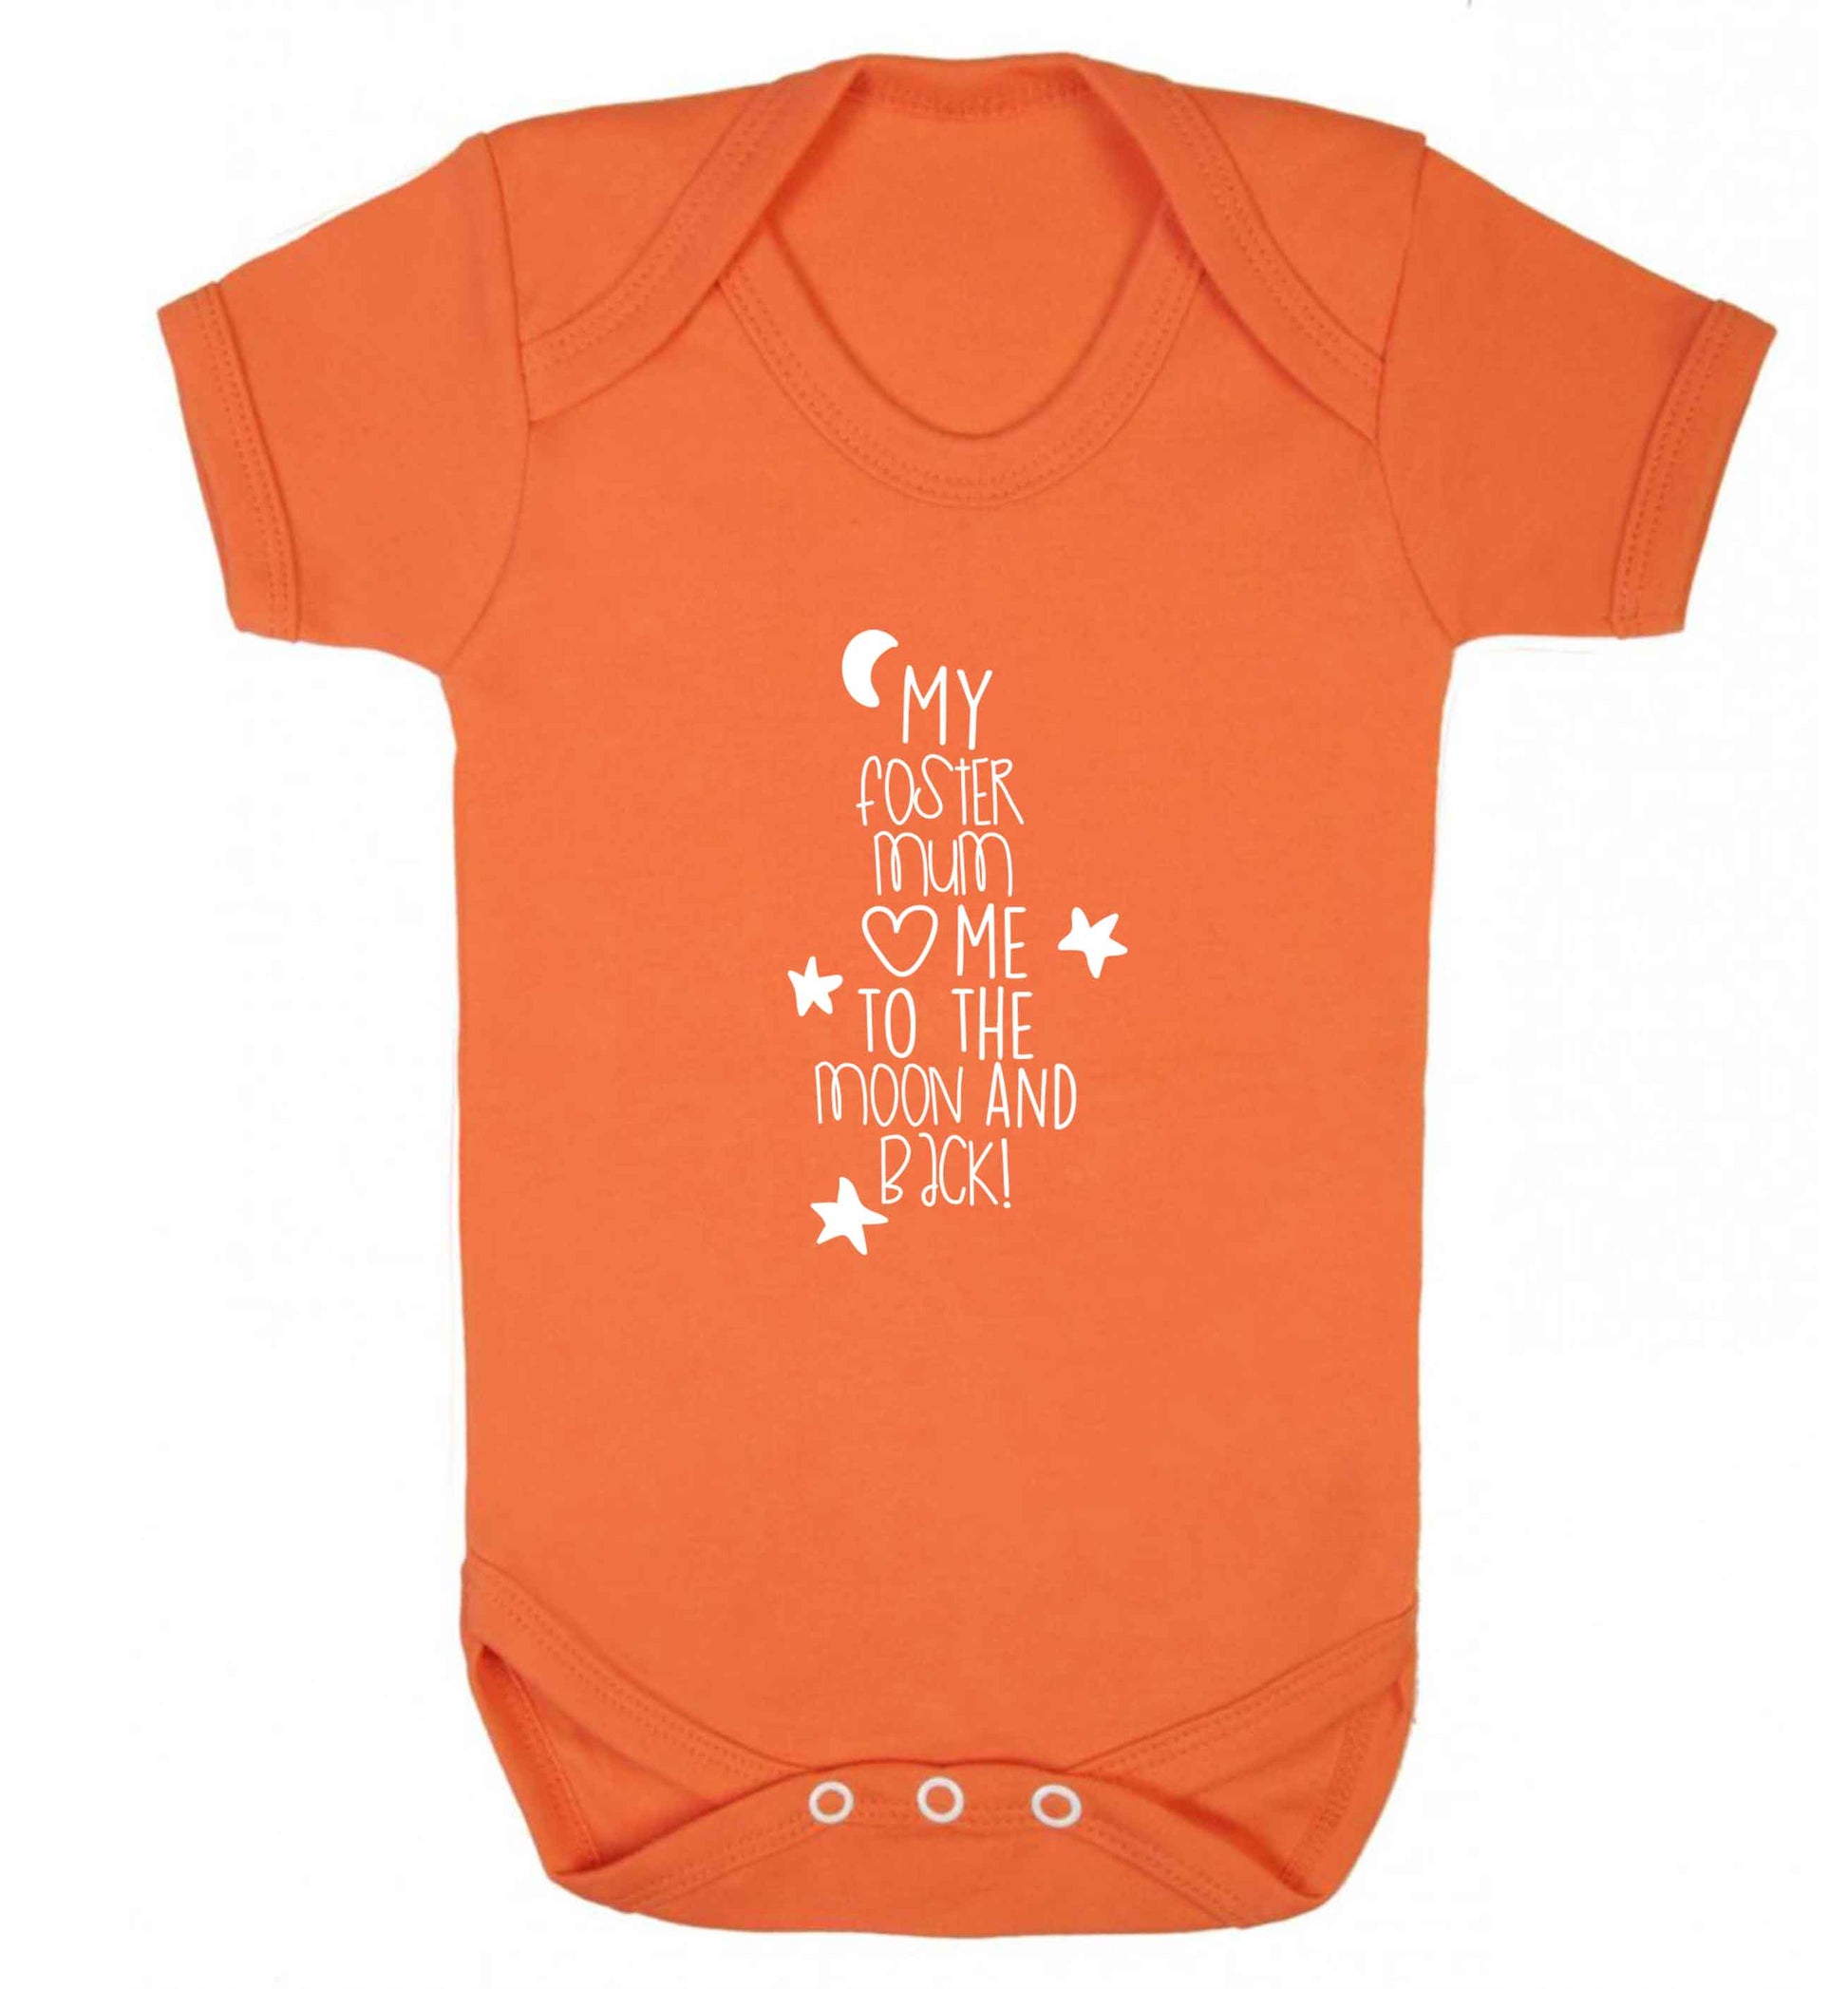 My foster mum loves me to the moon and back baby vest orange 18-24 months